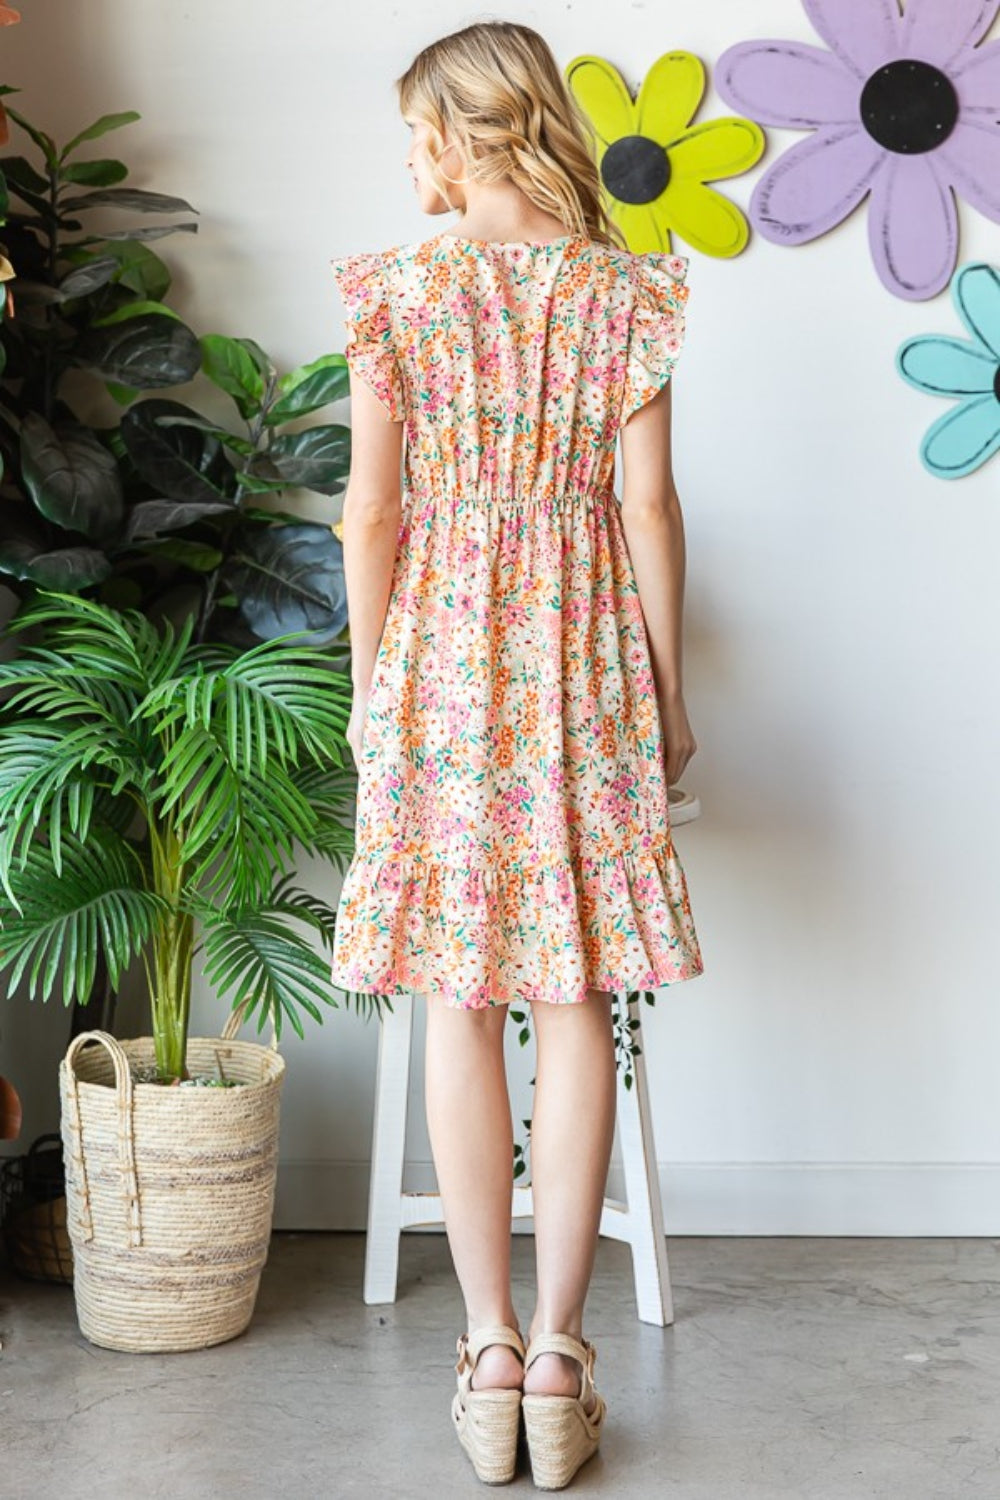 Introducing the Floral Ruffled V-Neck Dress. This stunning dress combines feminine elegance with a touch of playfulness. The floral pattern adds a romantic and vibrant flair, while the ruffled details create a whimsical and graceful look. S - 3X